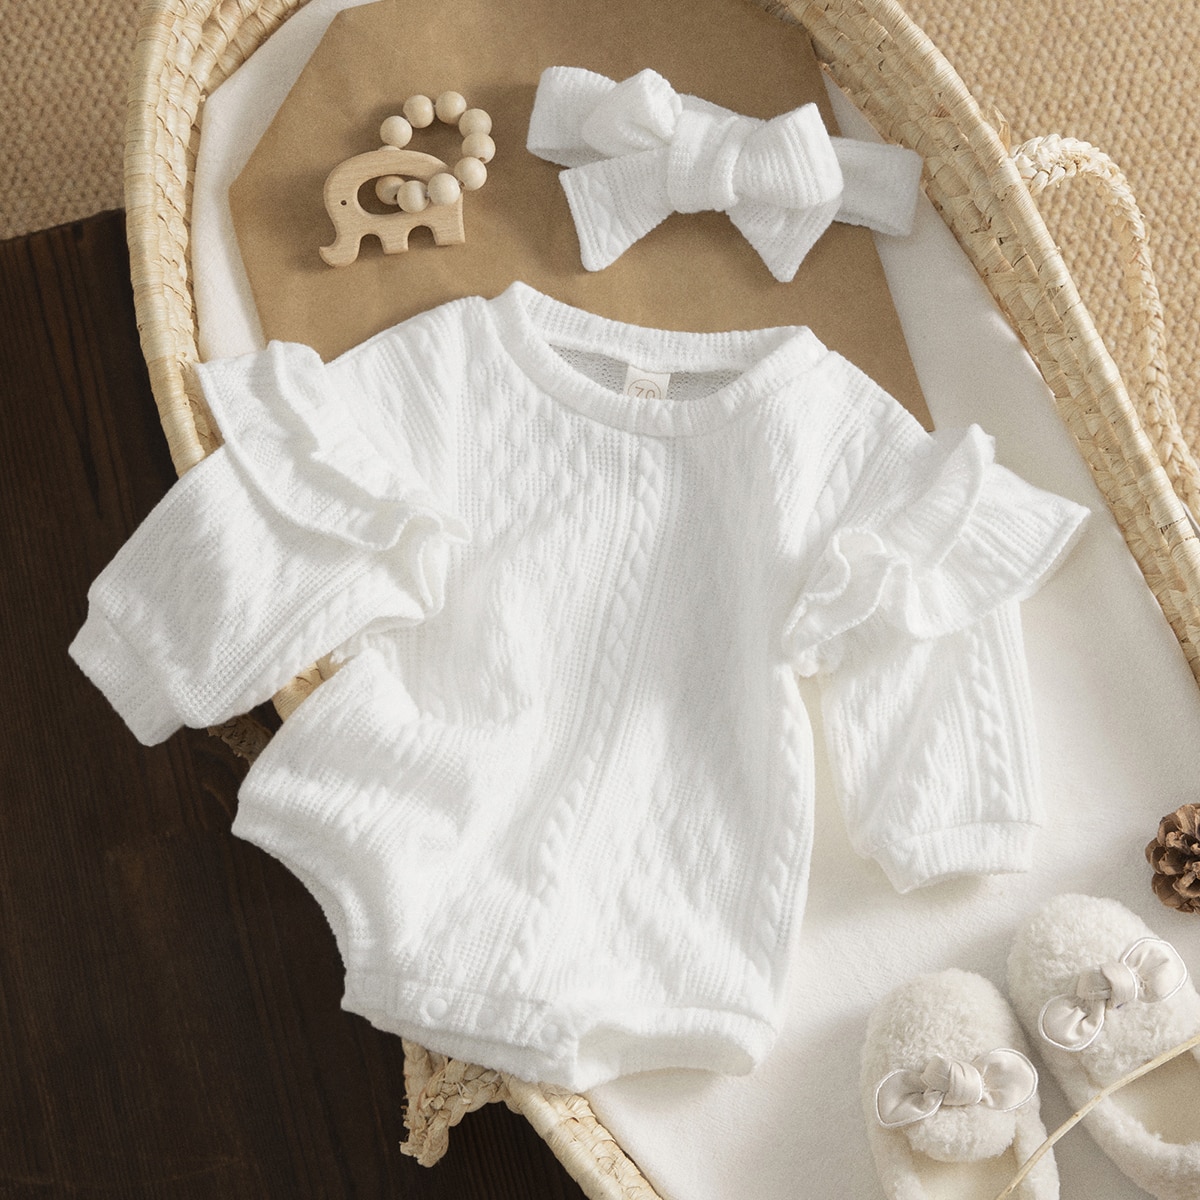 ma-baby-0-24M-Newborn-Infant-Girl-Romper-Toddler-Baby-Ruffle-Long-Sleeve-Jumpsuit-Playsuit-Solid-2